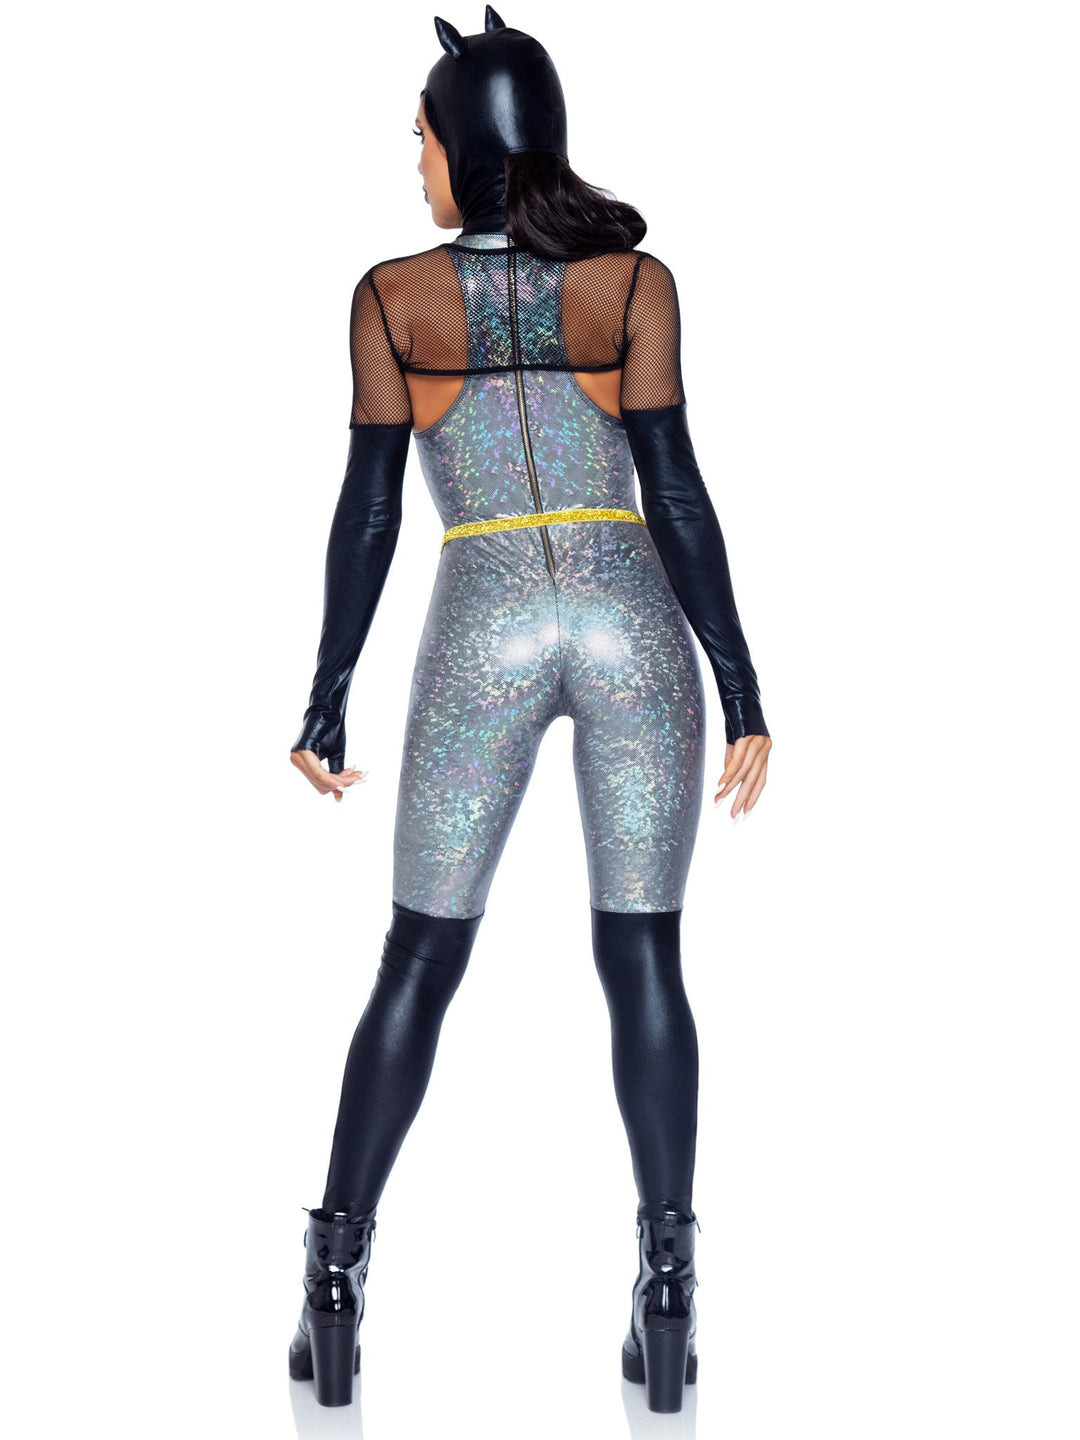 Feline Holographic Catsuit with Boot Detail and Fishnet Gloved Shrug